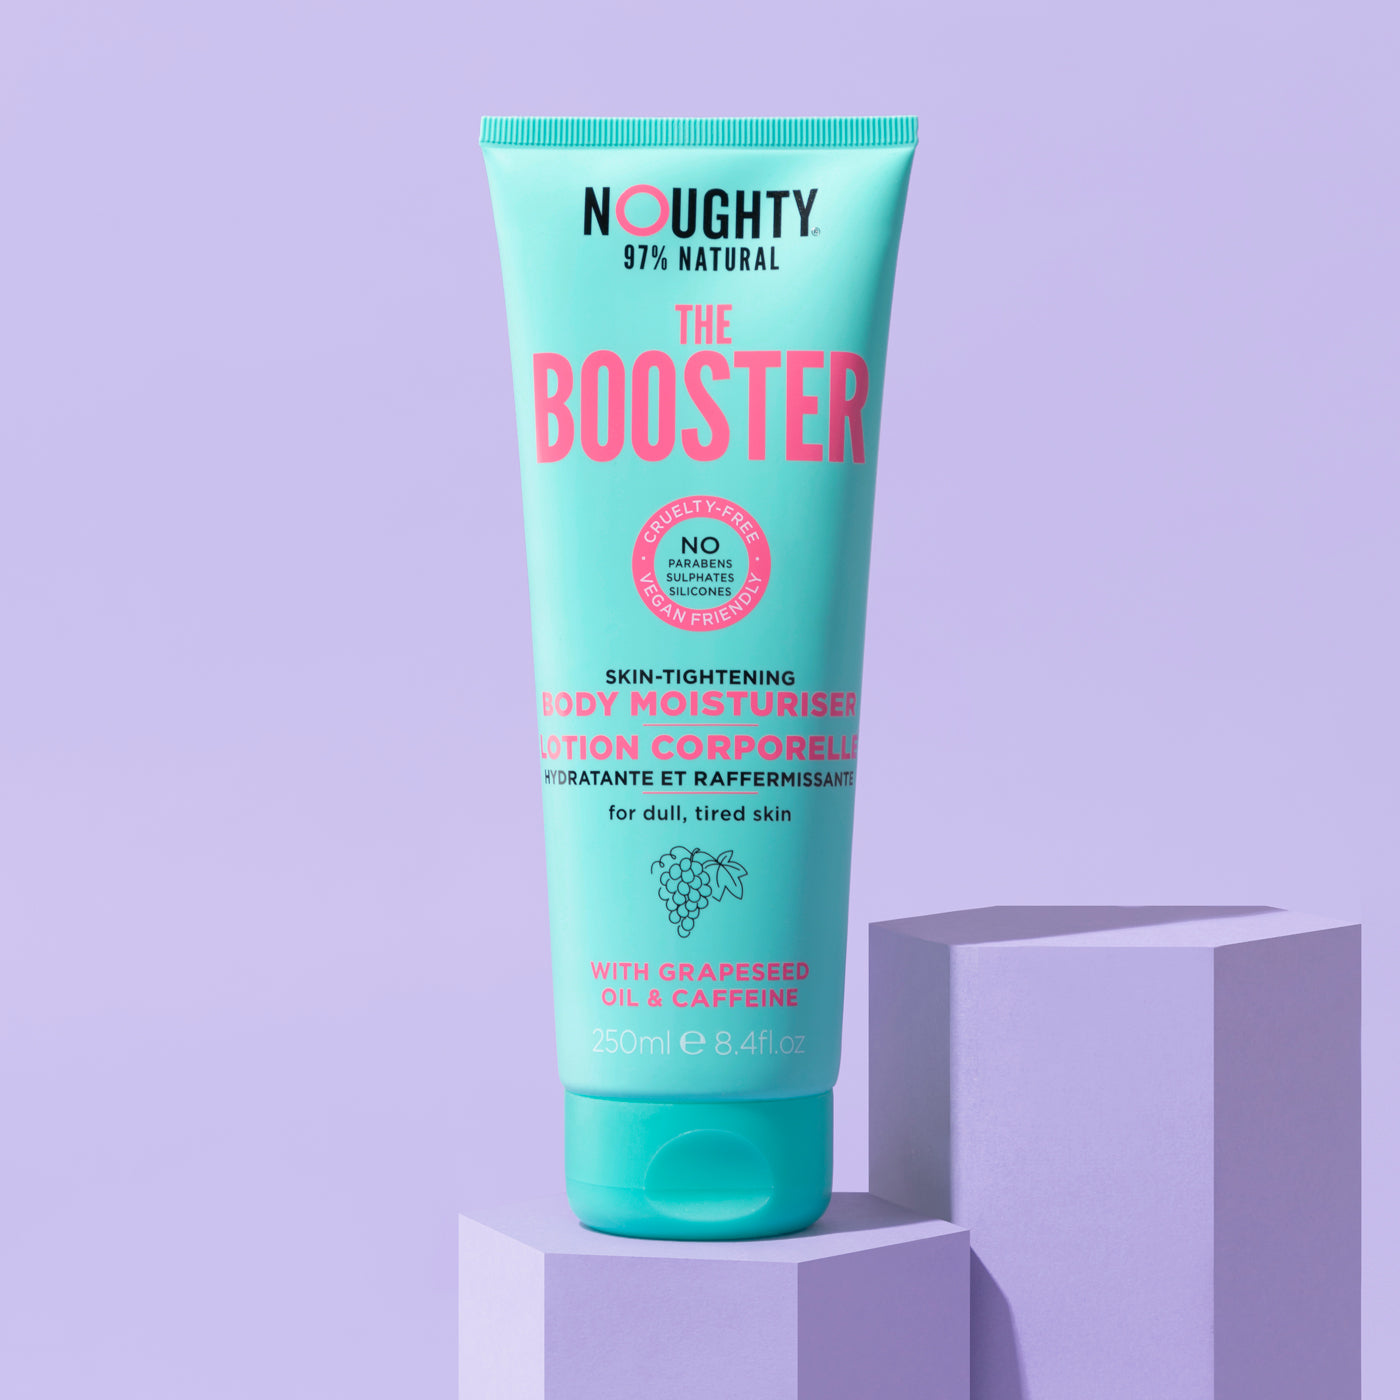 Noughty The Booster skin firming moisturizer for dull, challenged and cellulite prone skin. Natural haircare vegan cruelty free natural sulphate free paraben free